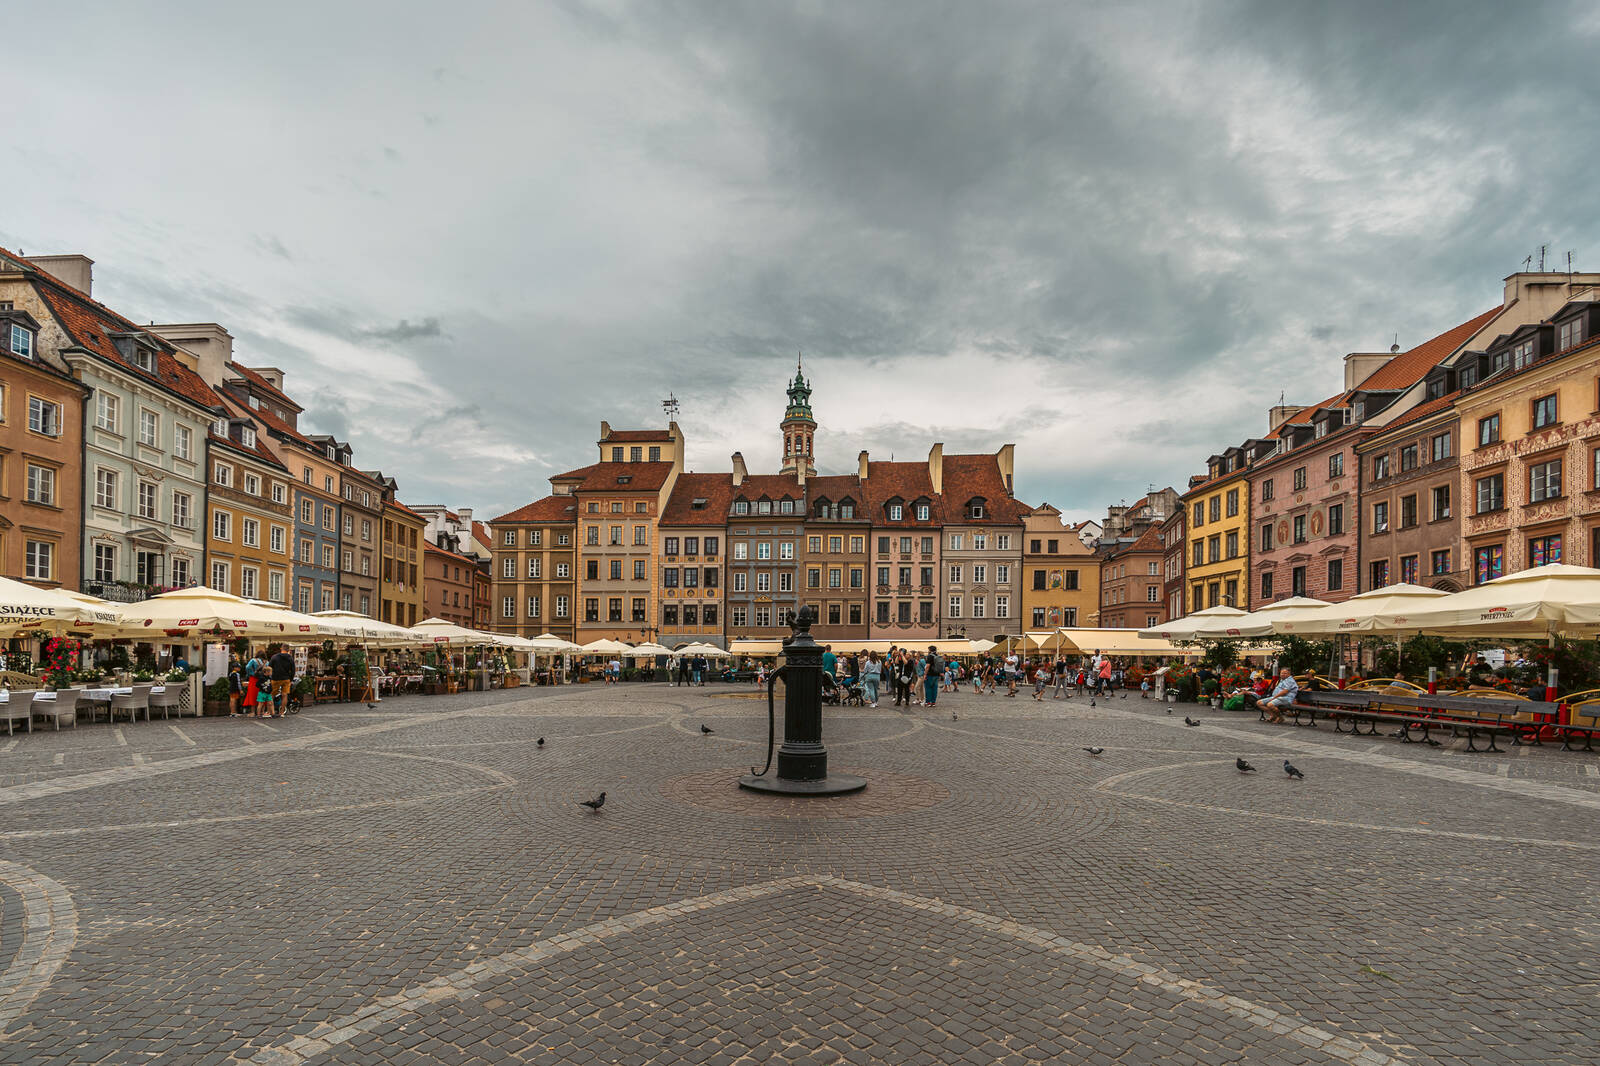 Image of Warsaw Old Town Square by James Billings.